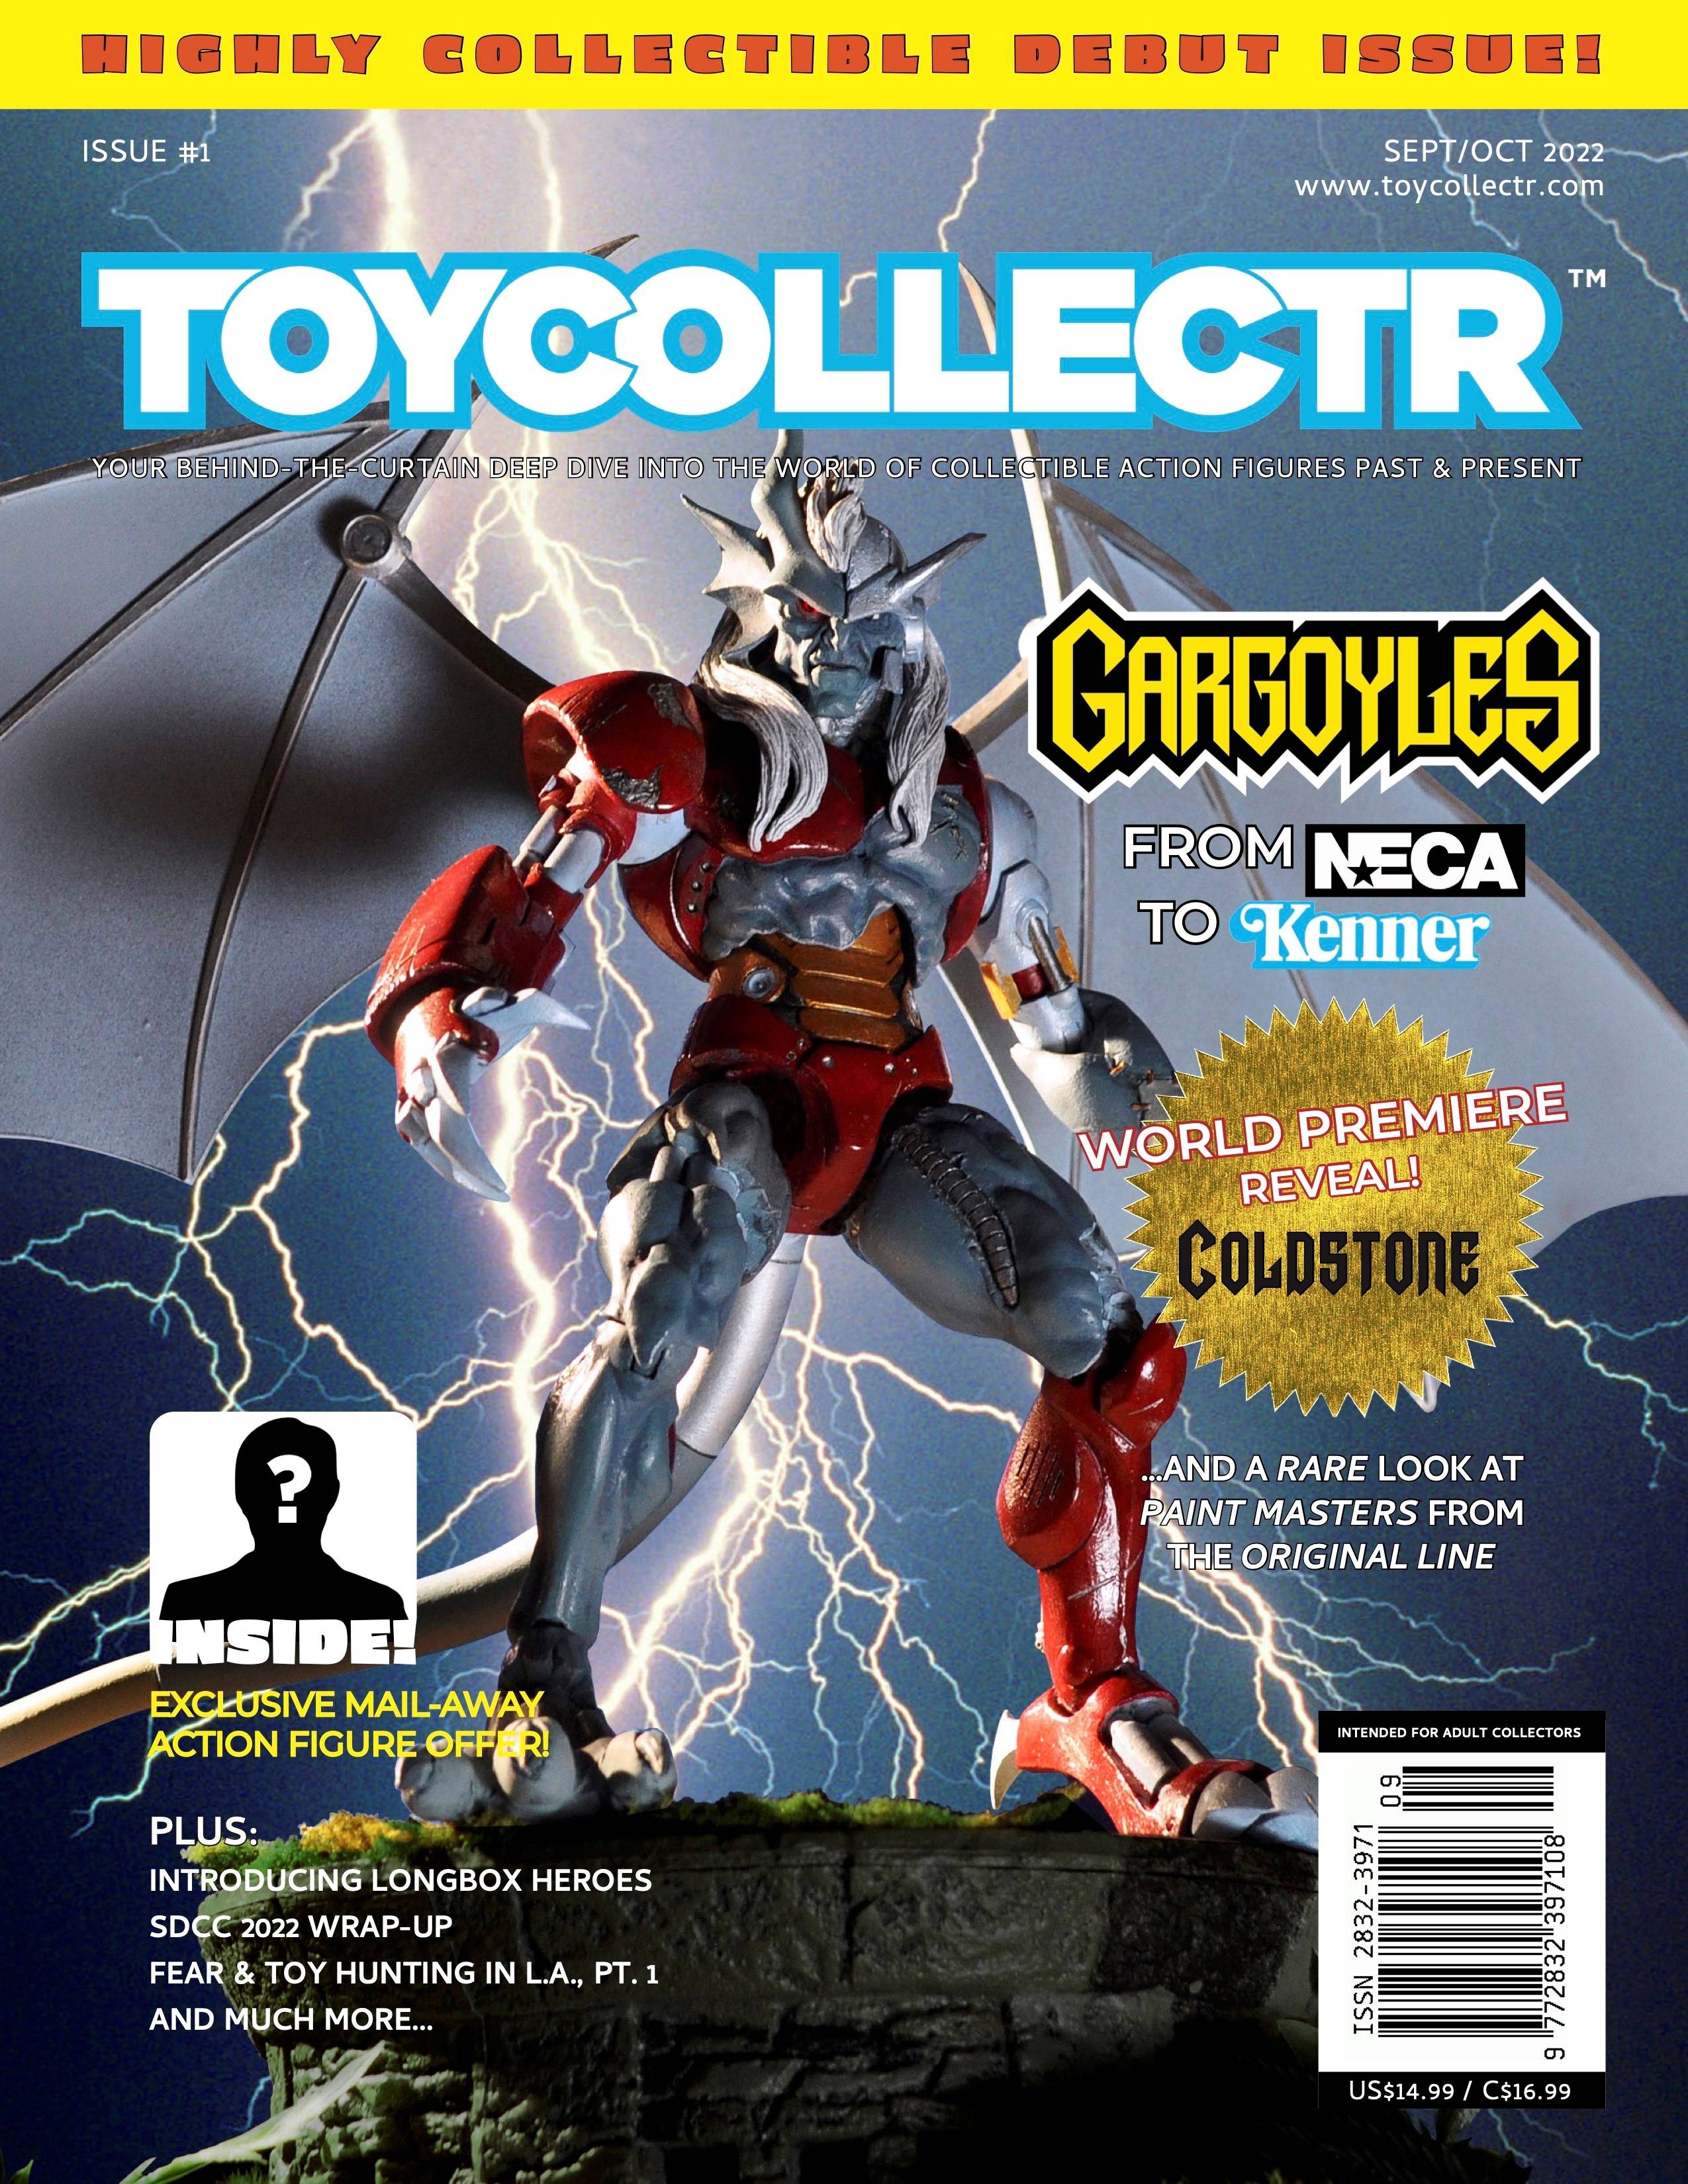 TOYCOLLECTR MAGAZINE #1 (MR)